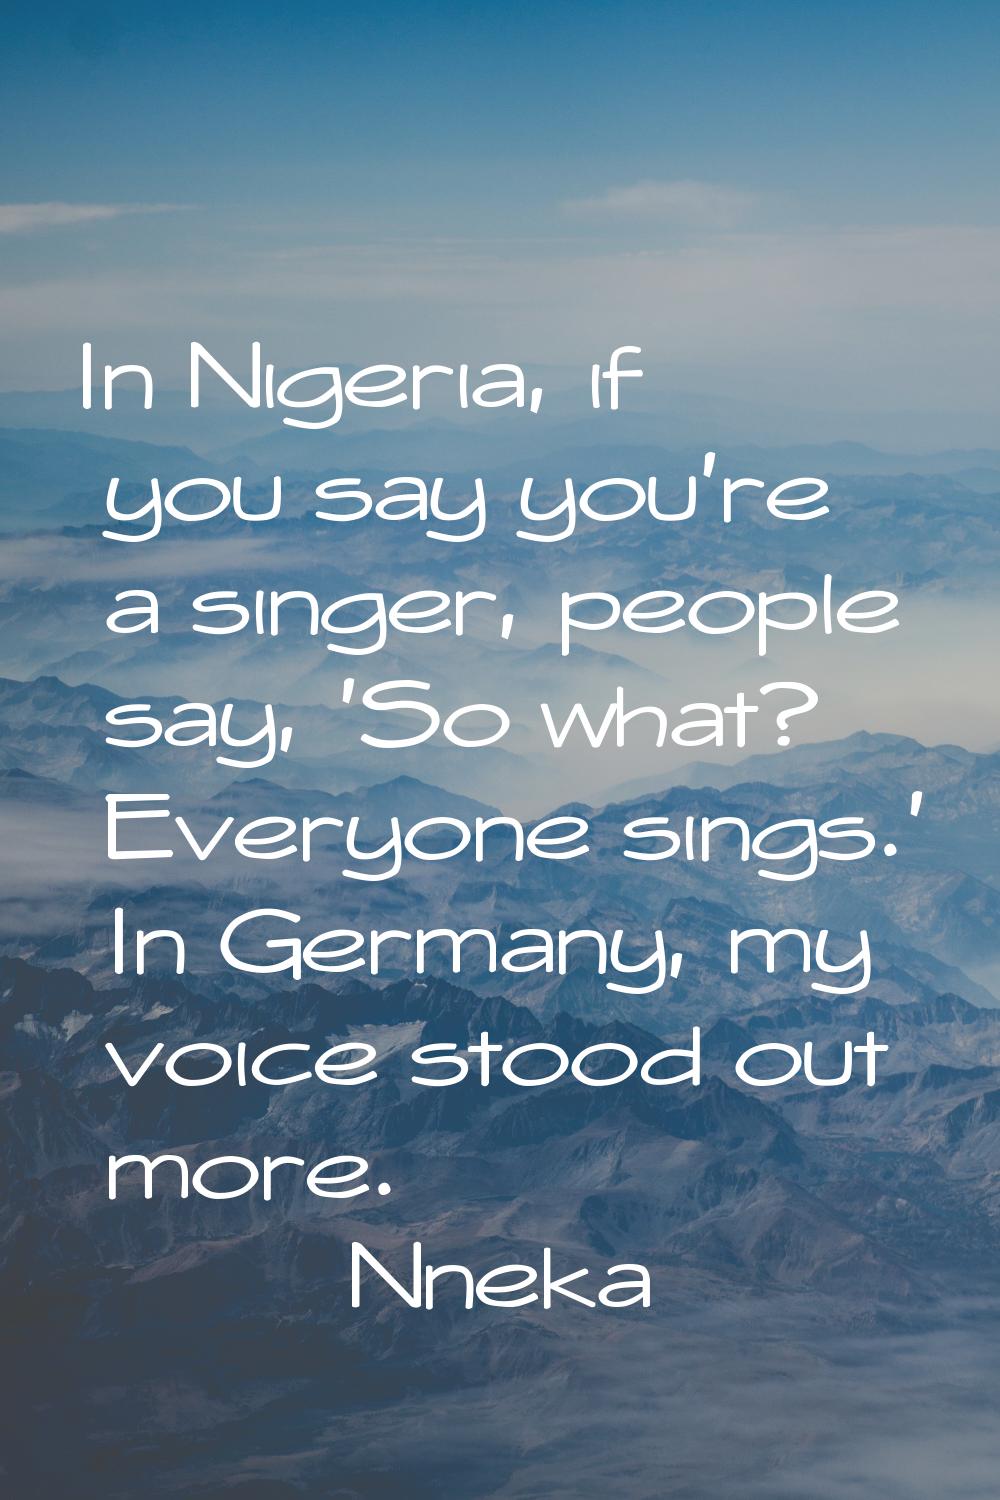 In Nigeria, if you say you're a singer, people say, 'So what? Everyone sings.' In Germany, my voice